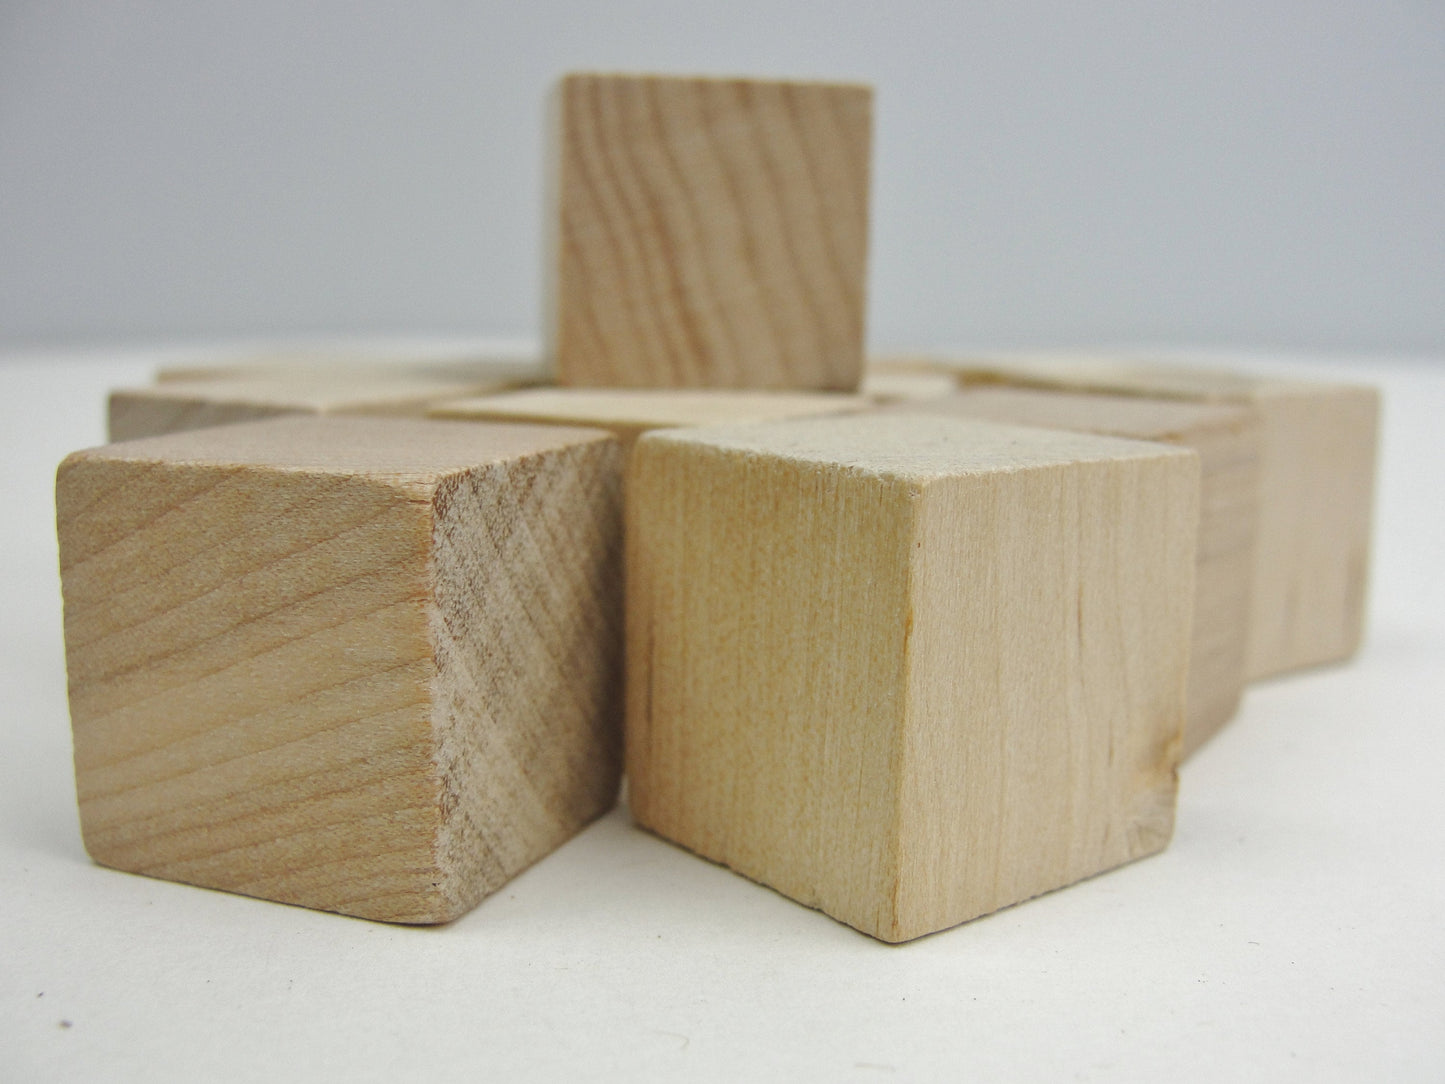 Small wooden cube 3/4" wood block set of 12